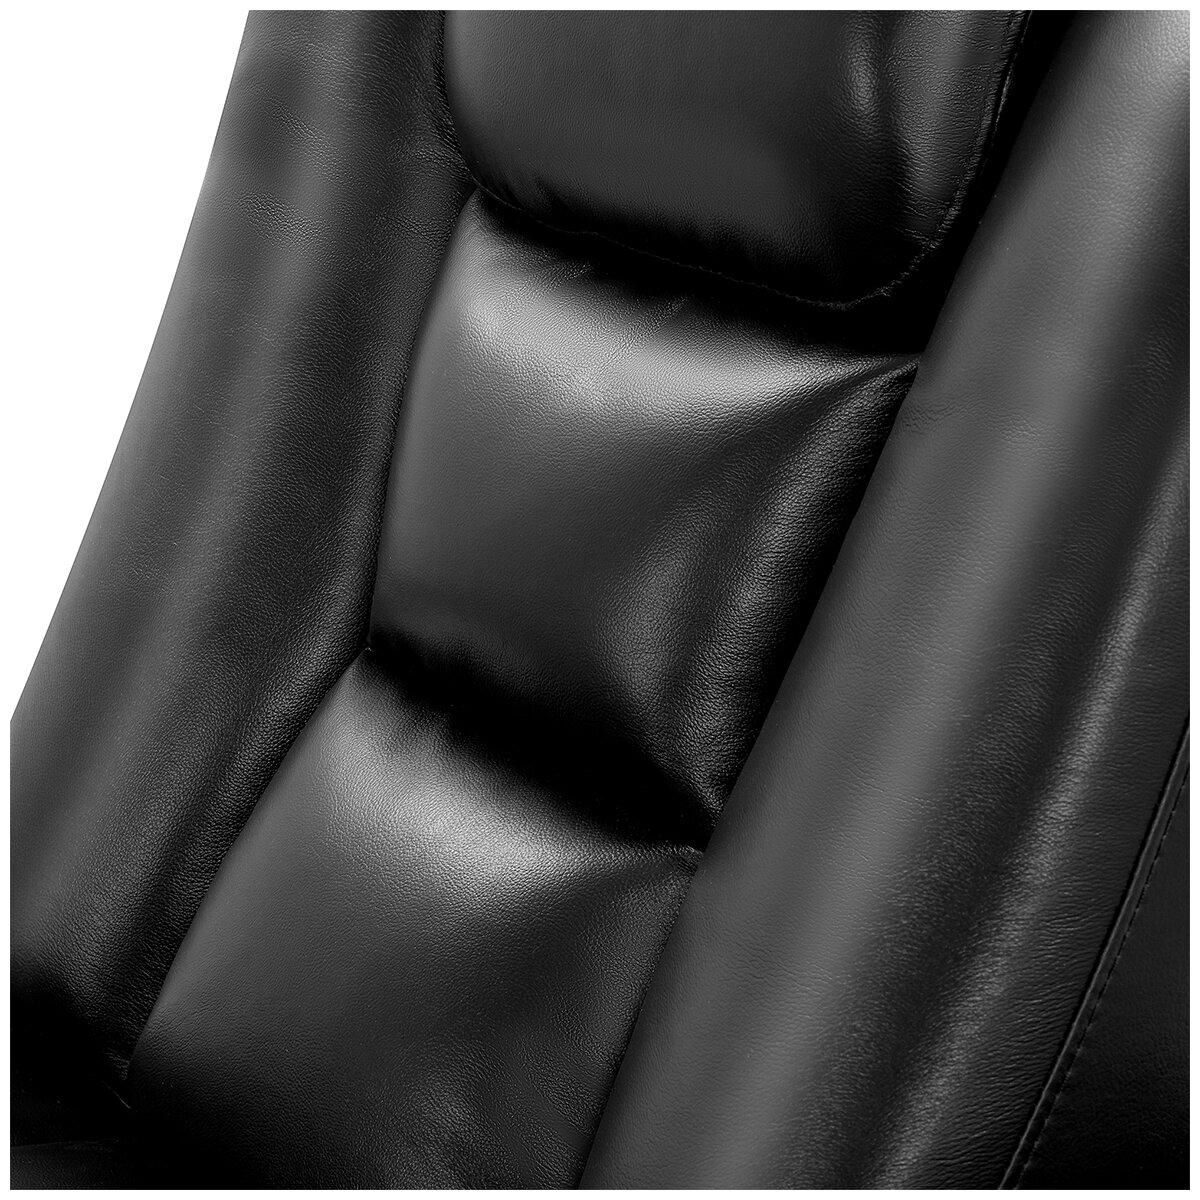 Valencia Theater Seating Venice 1 Seater Recliner Black